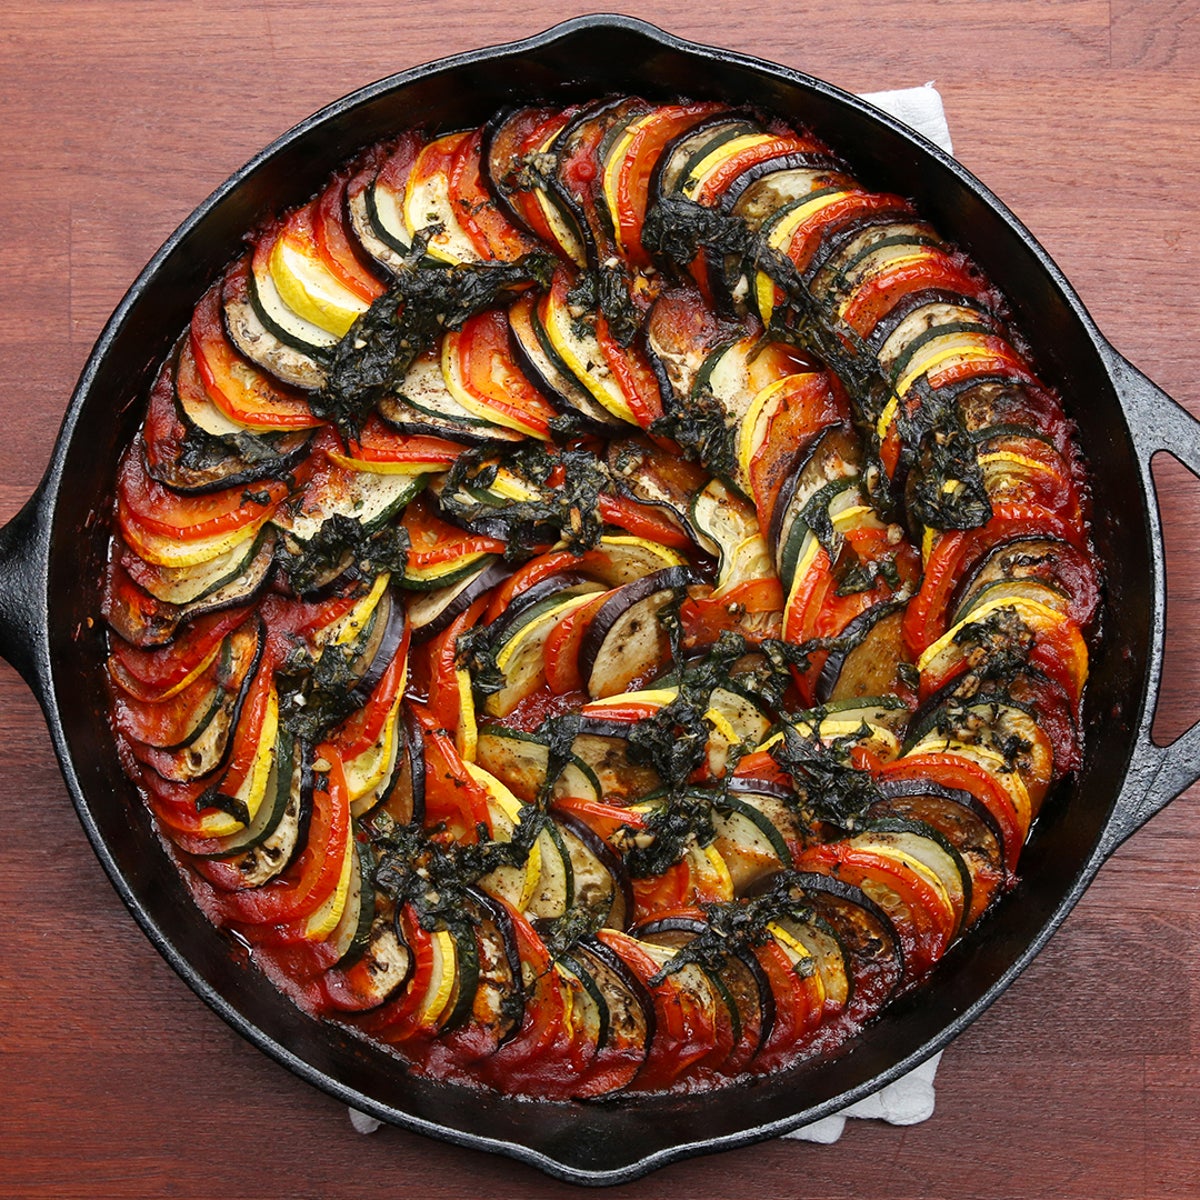 A Remarkably Easy Ratatouille Recipe It Took a Lifetime to Get Right - WSJ